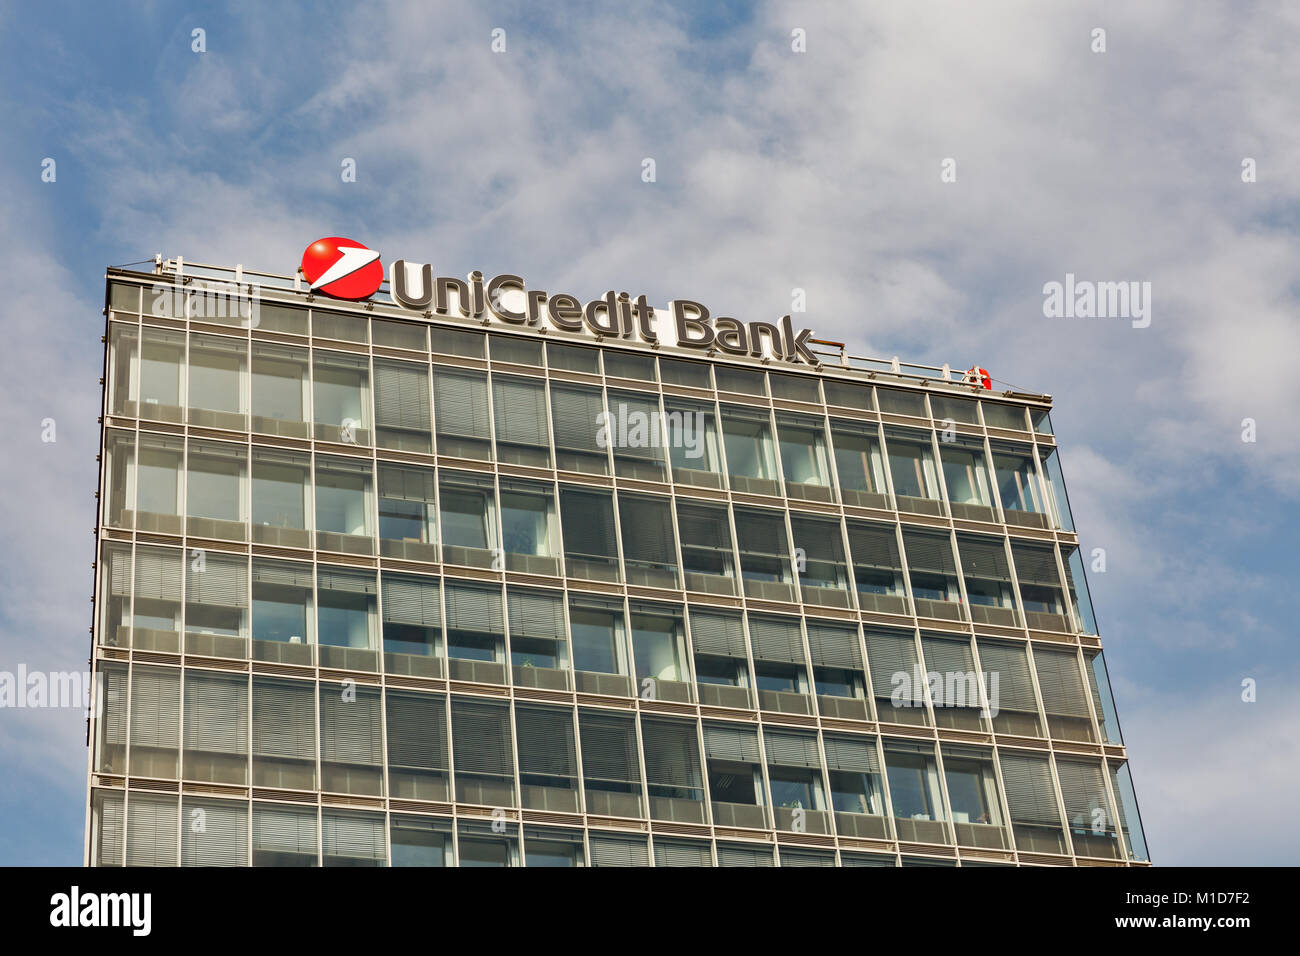 BRATISLAVA, SLOVAKIA - SEPTEMBER 26, 2017: Unicredit bank logo on top of the office building. Unicredit S.p.A. is one of the biggest Italian and Europ Stock Photo